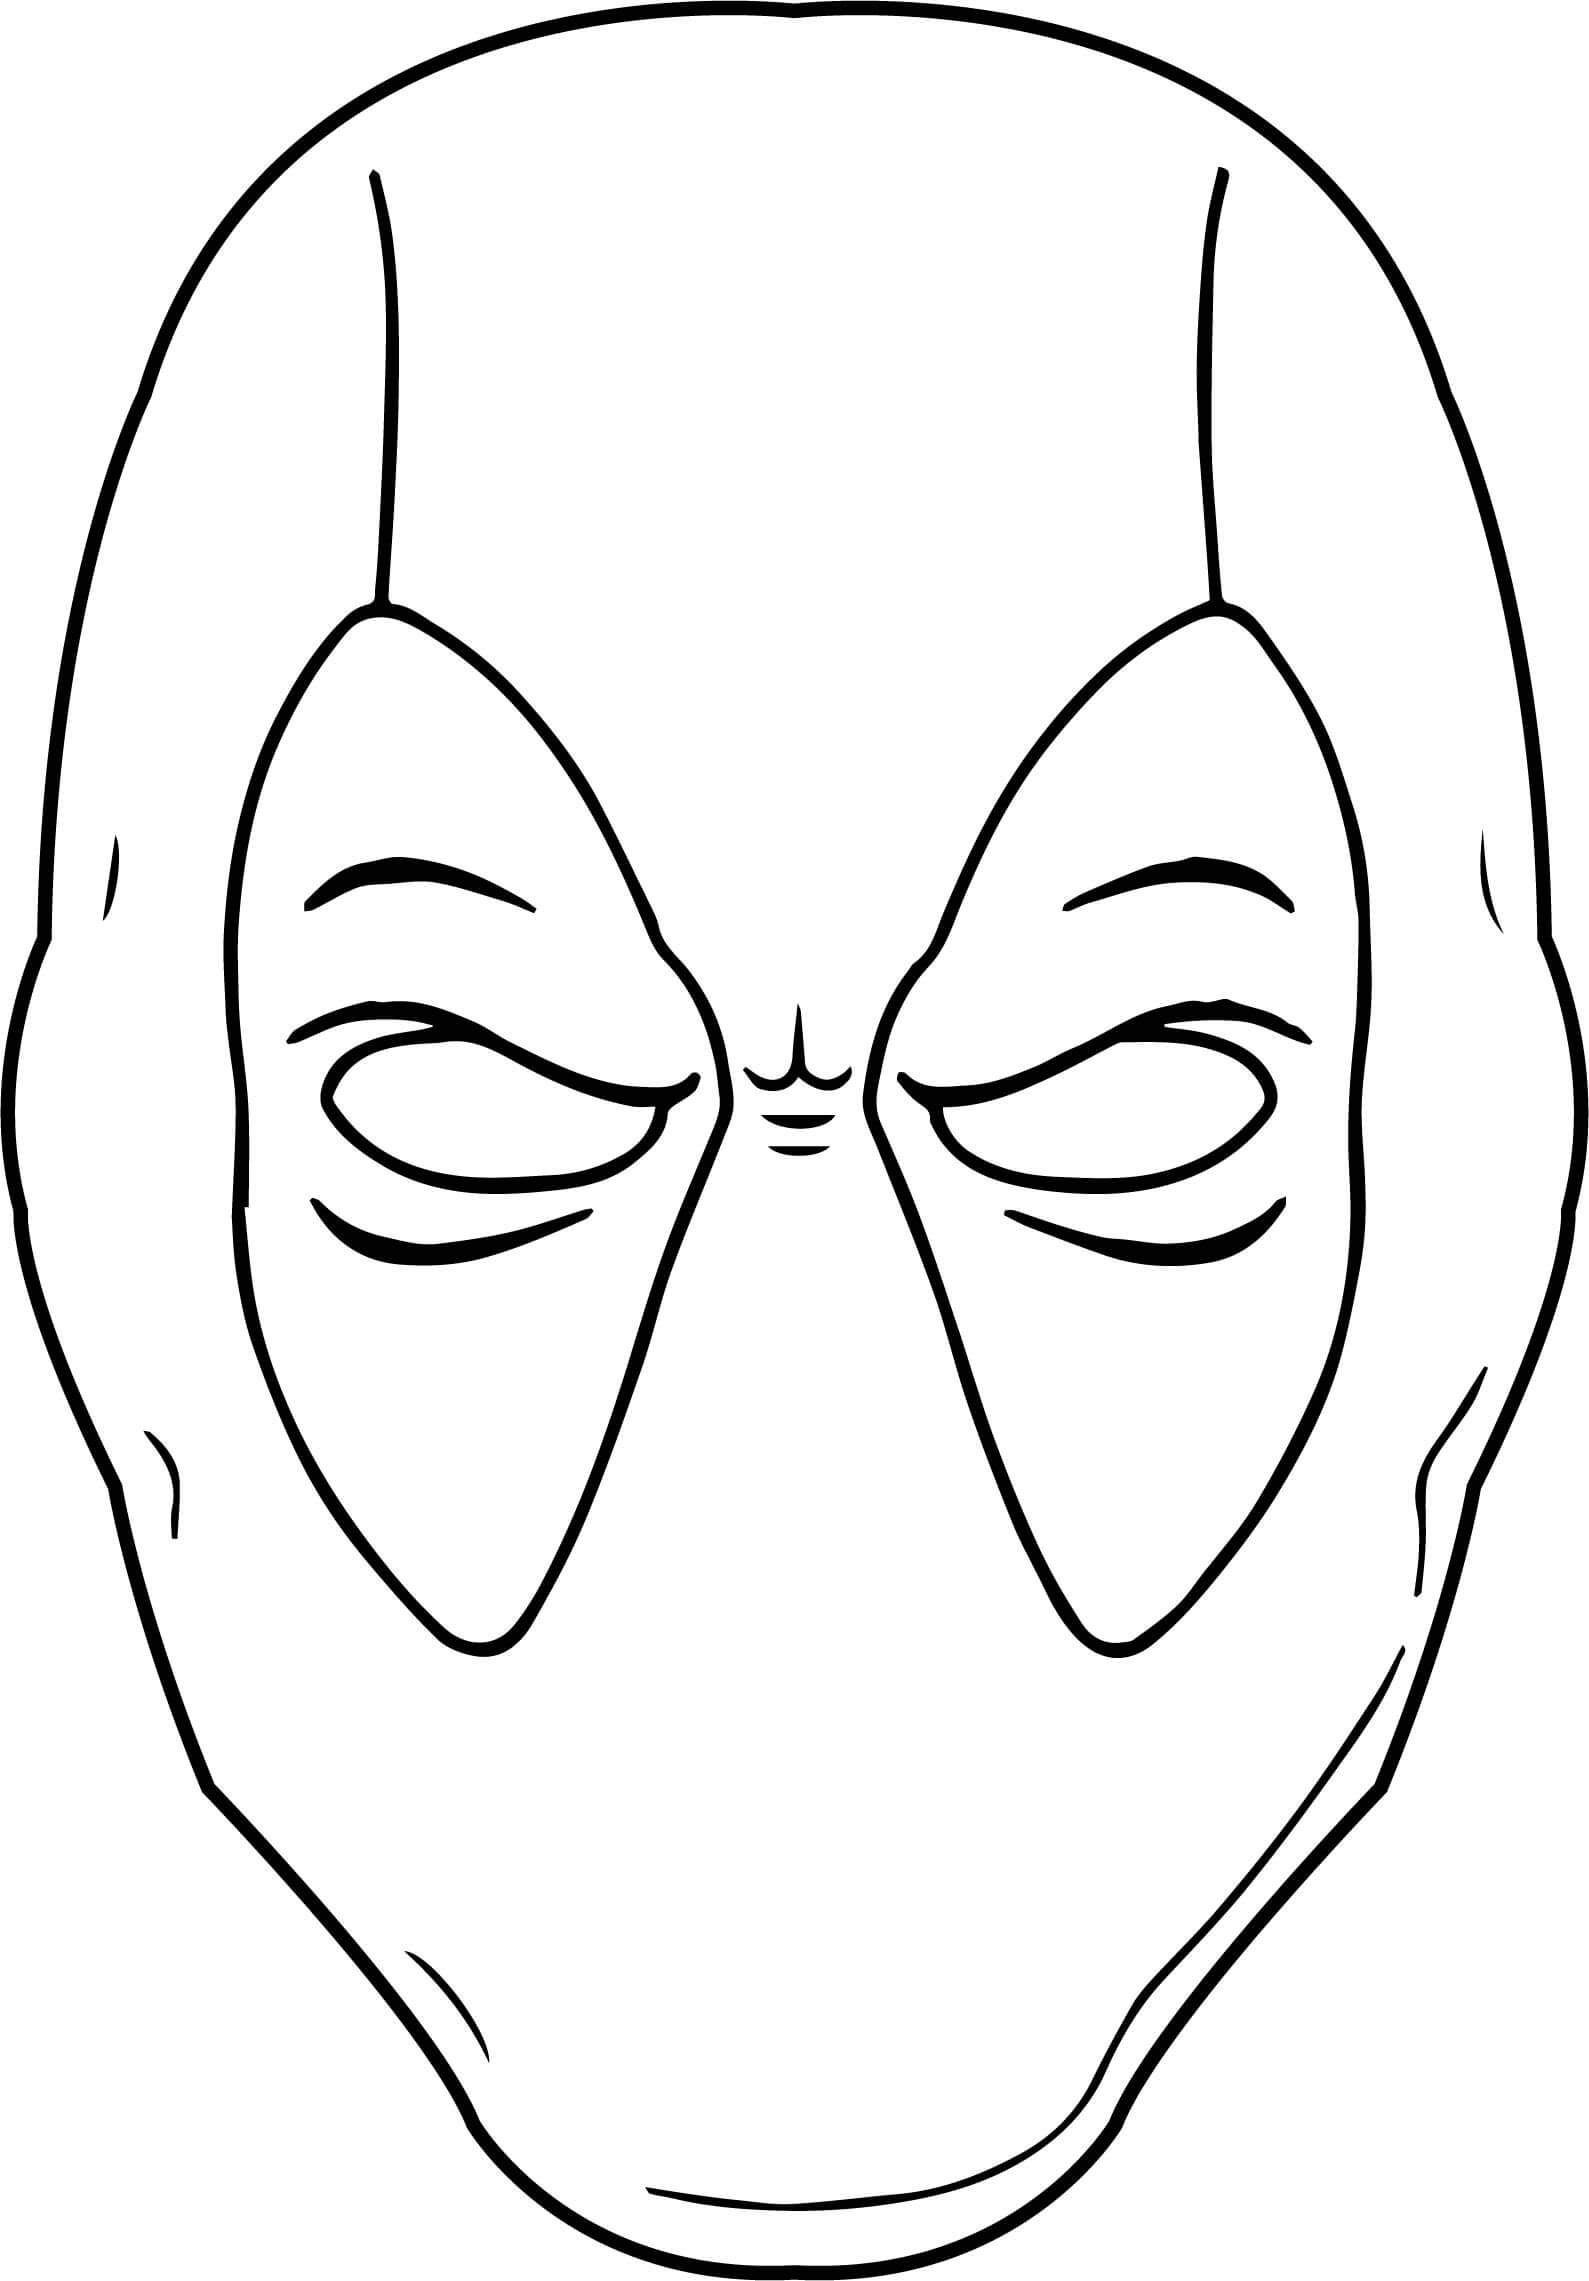 Simple Deadpool Mask Coloring Page